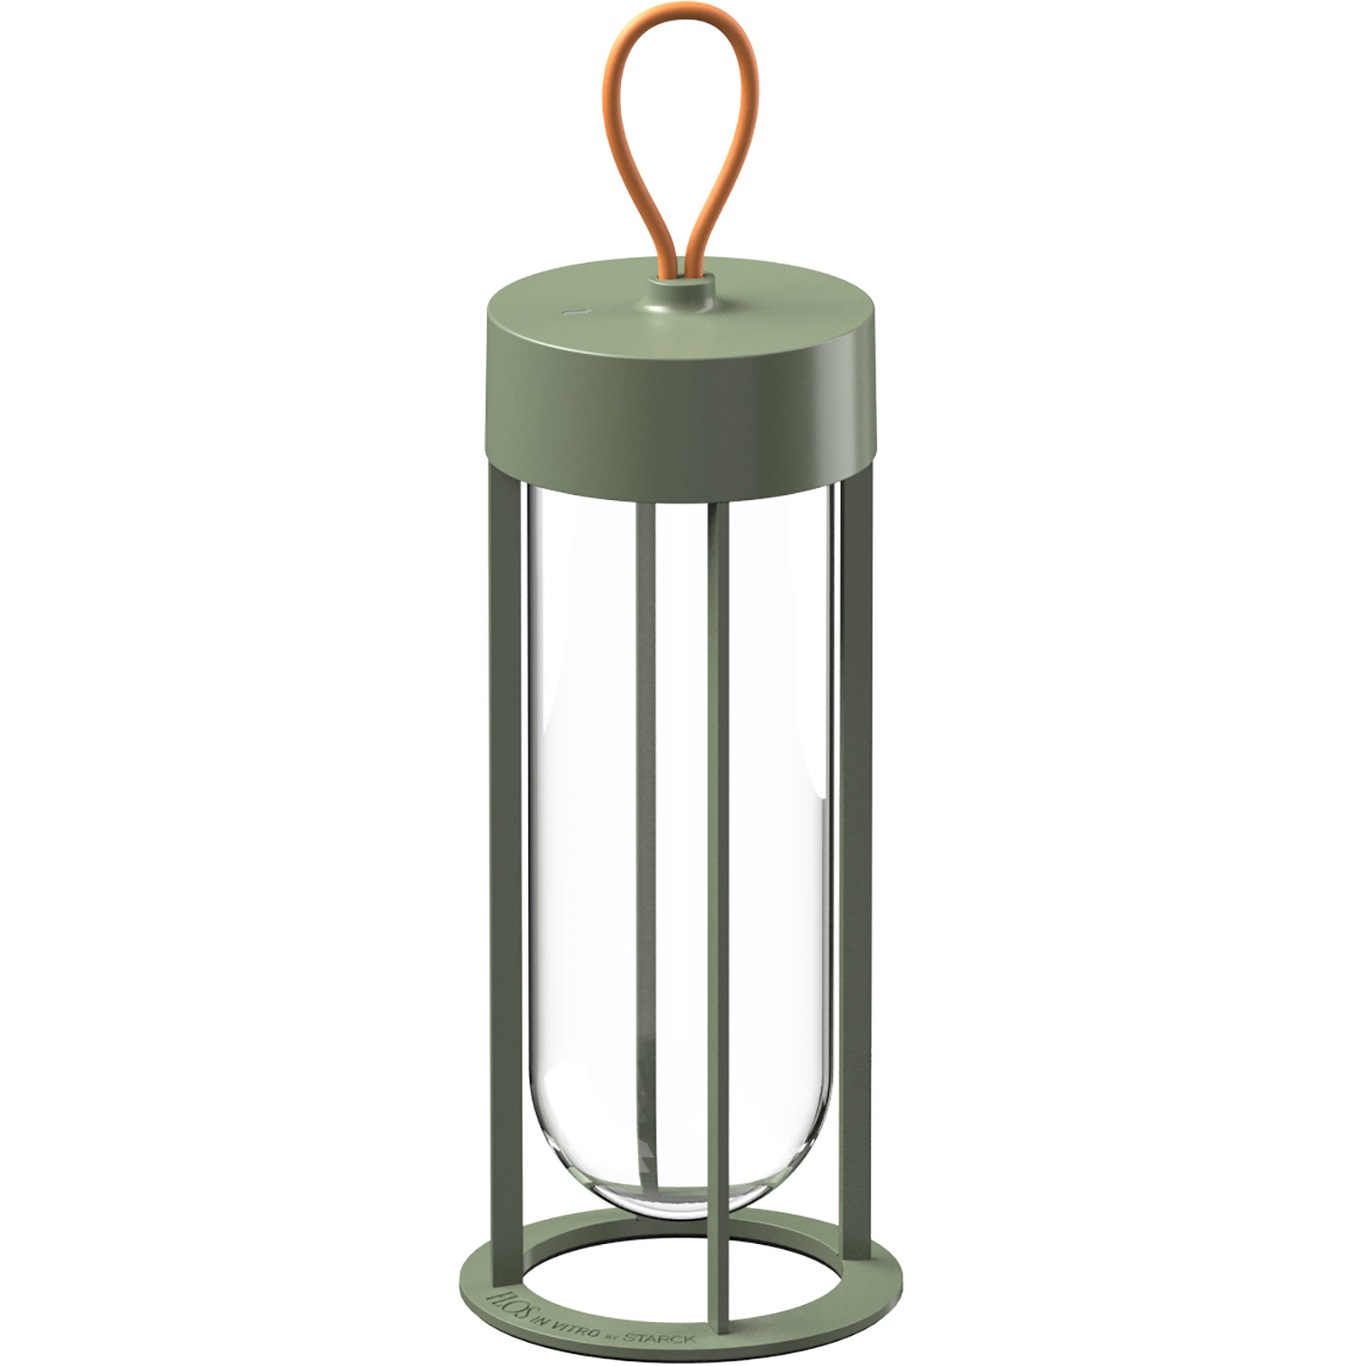 In Vitro Unplugged Table Lamp, Pale green